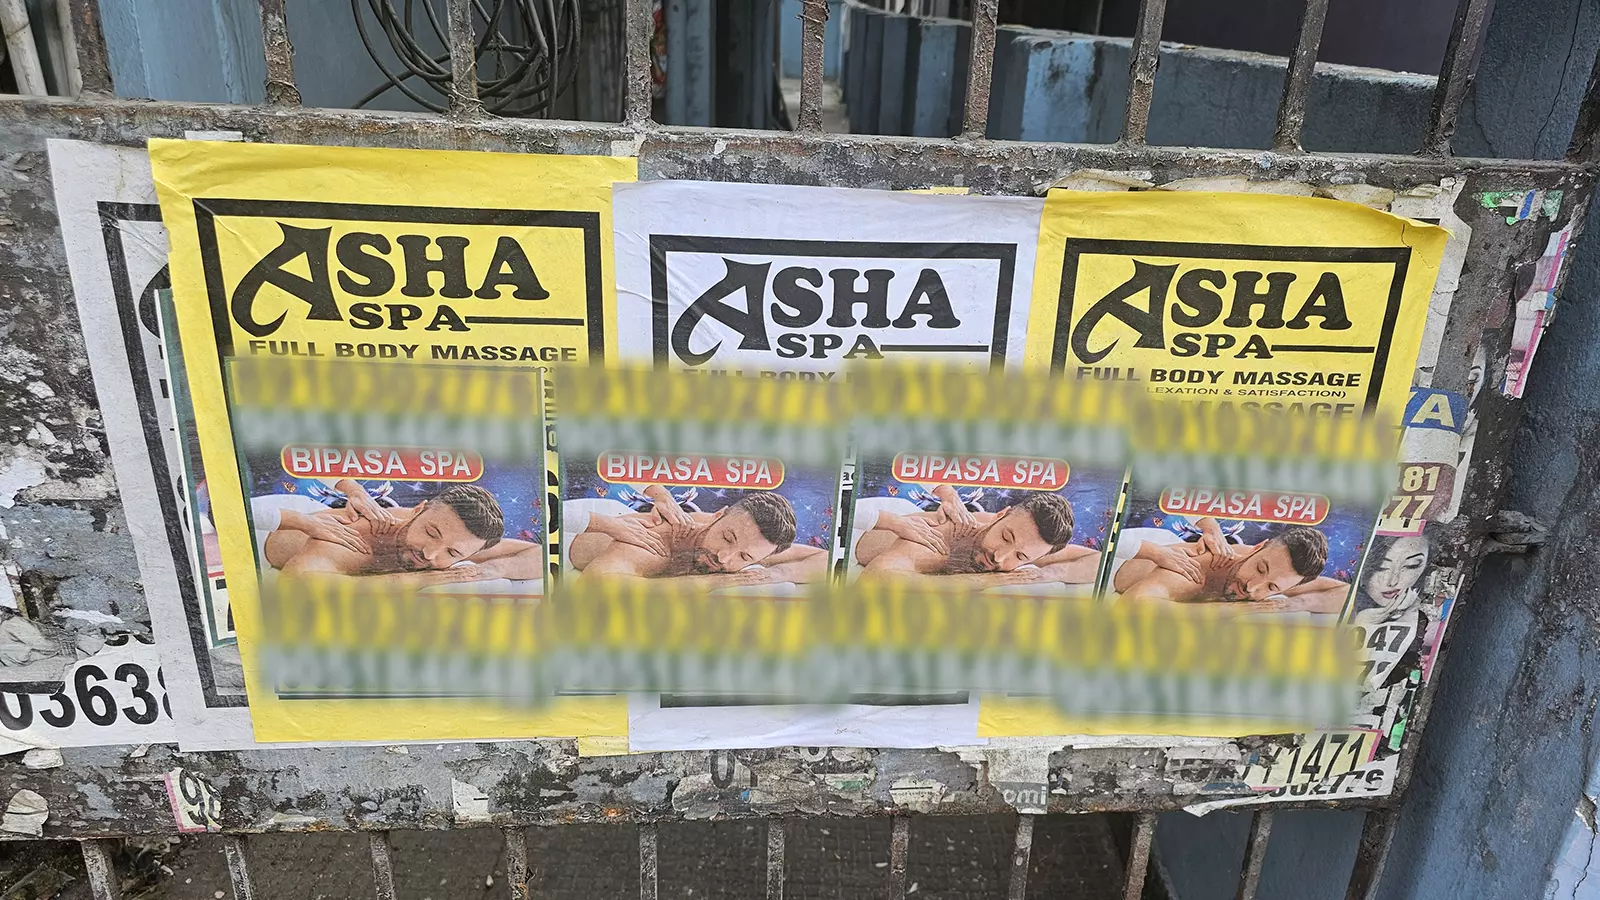 Spa posters have become ubiquitous in Kolkata.